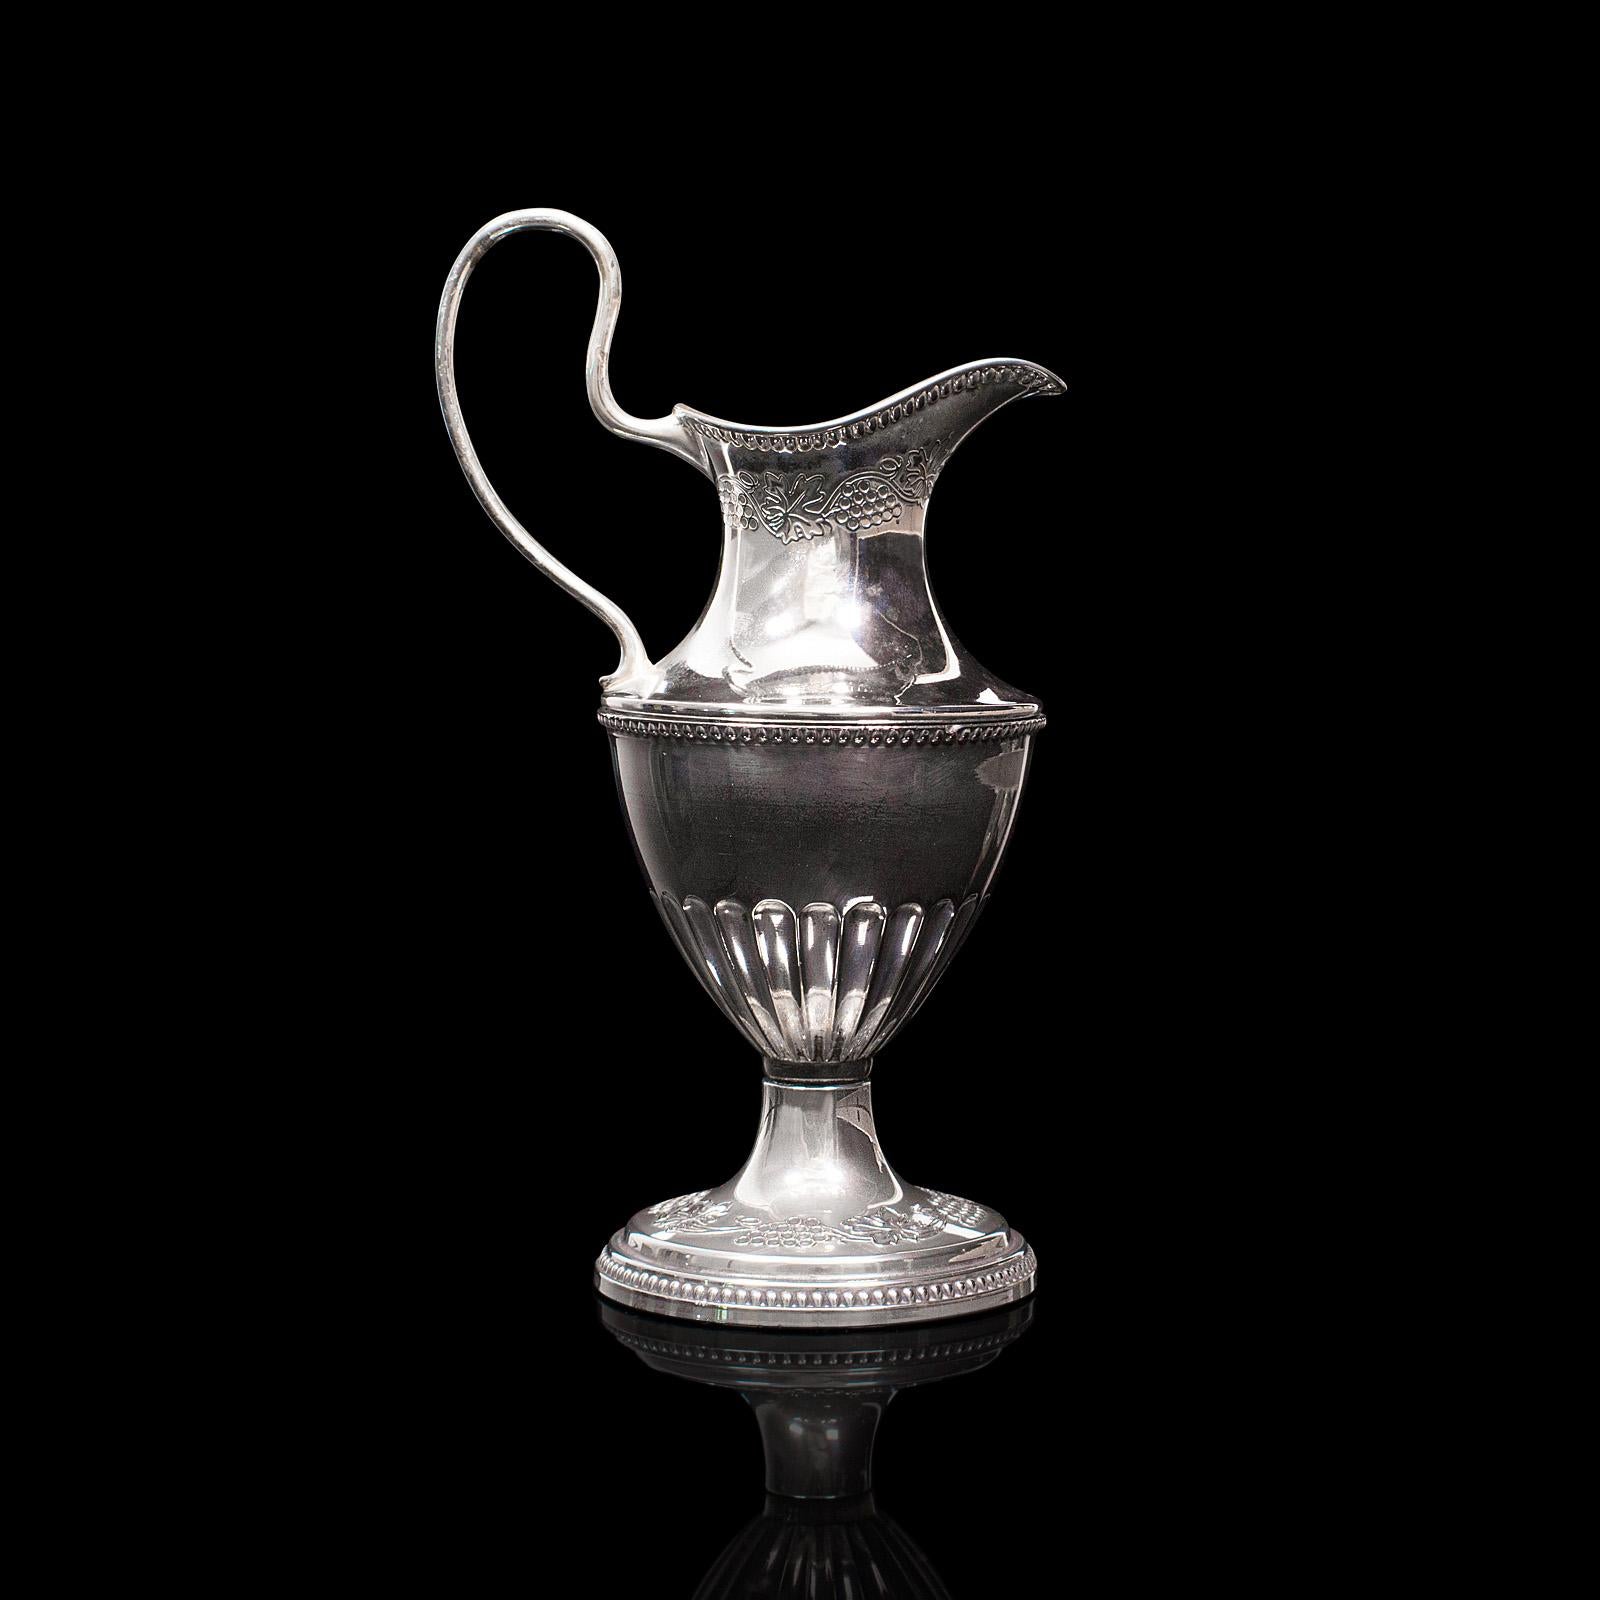 This is a small antique pouring jug. An English, silver plate decorative posy vase, dating to the Edwardian period, circa 1910.

Of delightfully petite form
Displays a desirable aged patina with minimal light tarnish
Polished silver plate